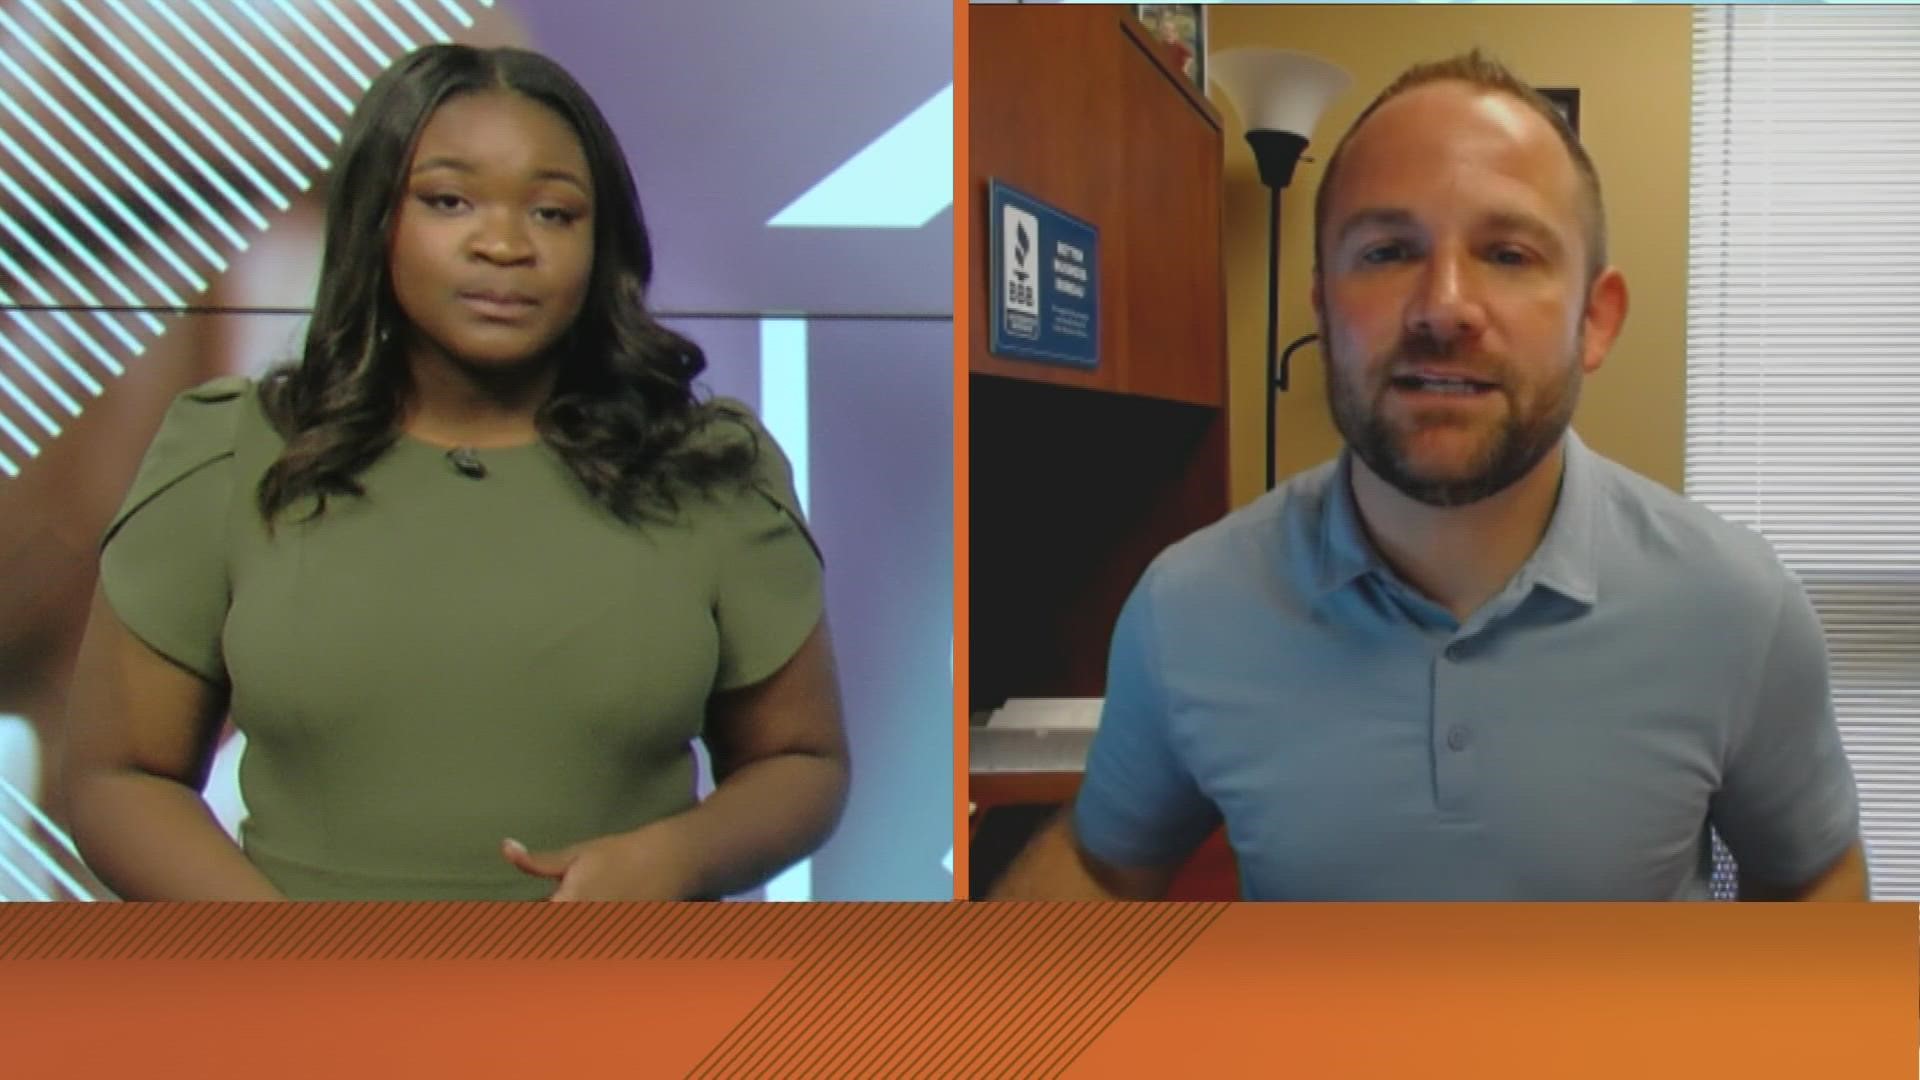 ABC24 spoke with Daniel Irwin from the Better Business Bureau of the Mid-South about what consumers need to know about using cryptocurrency.